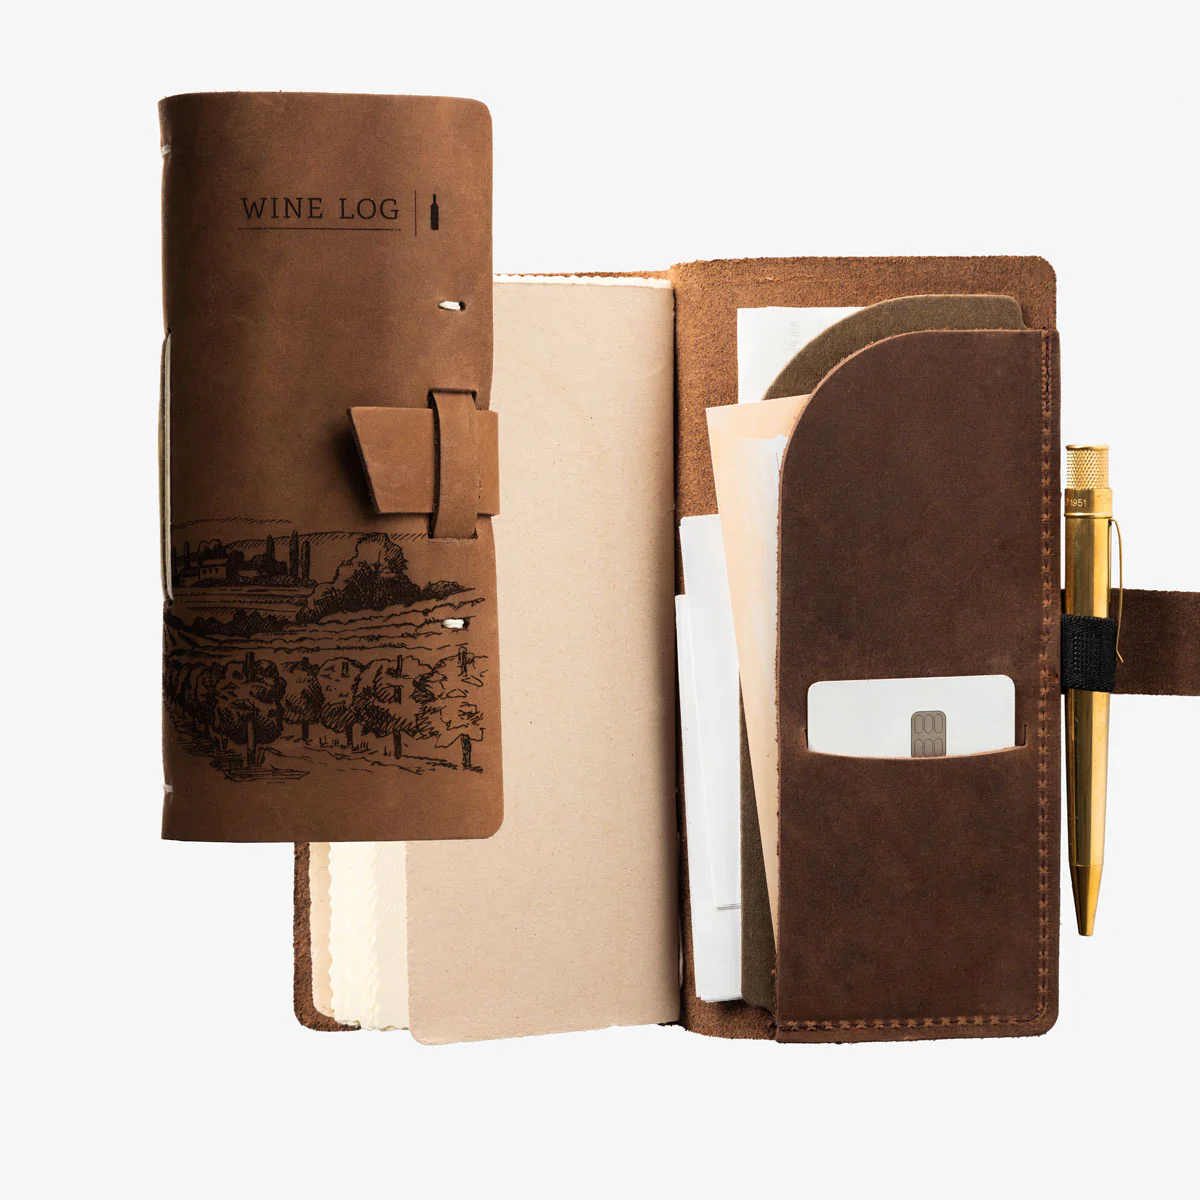 29. Toast to 3 Years of Love with a Unique Leather Wine Journal